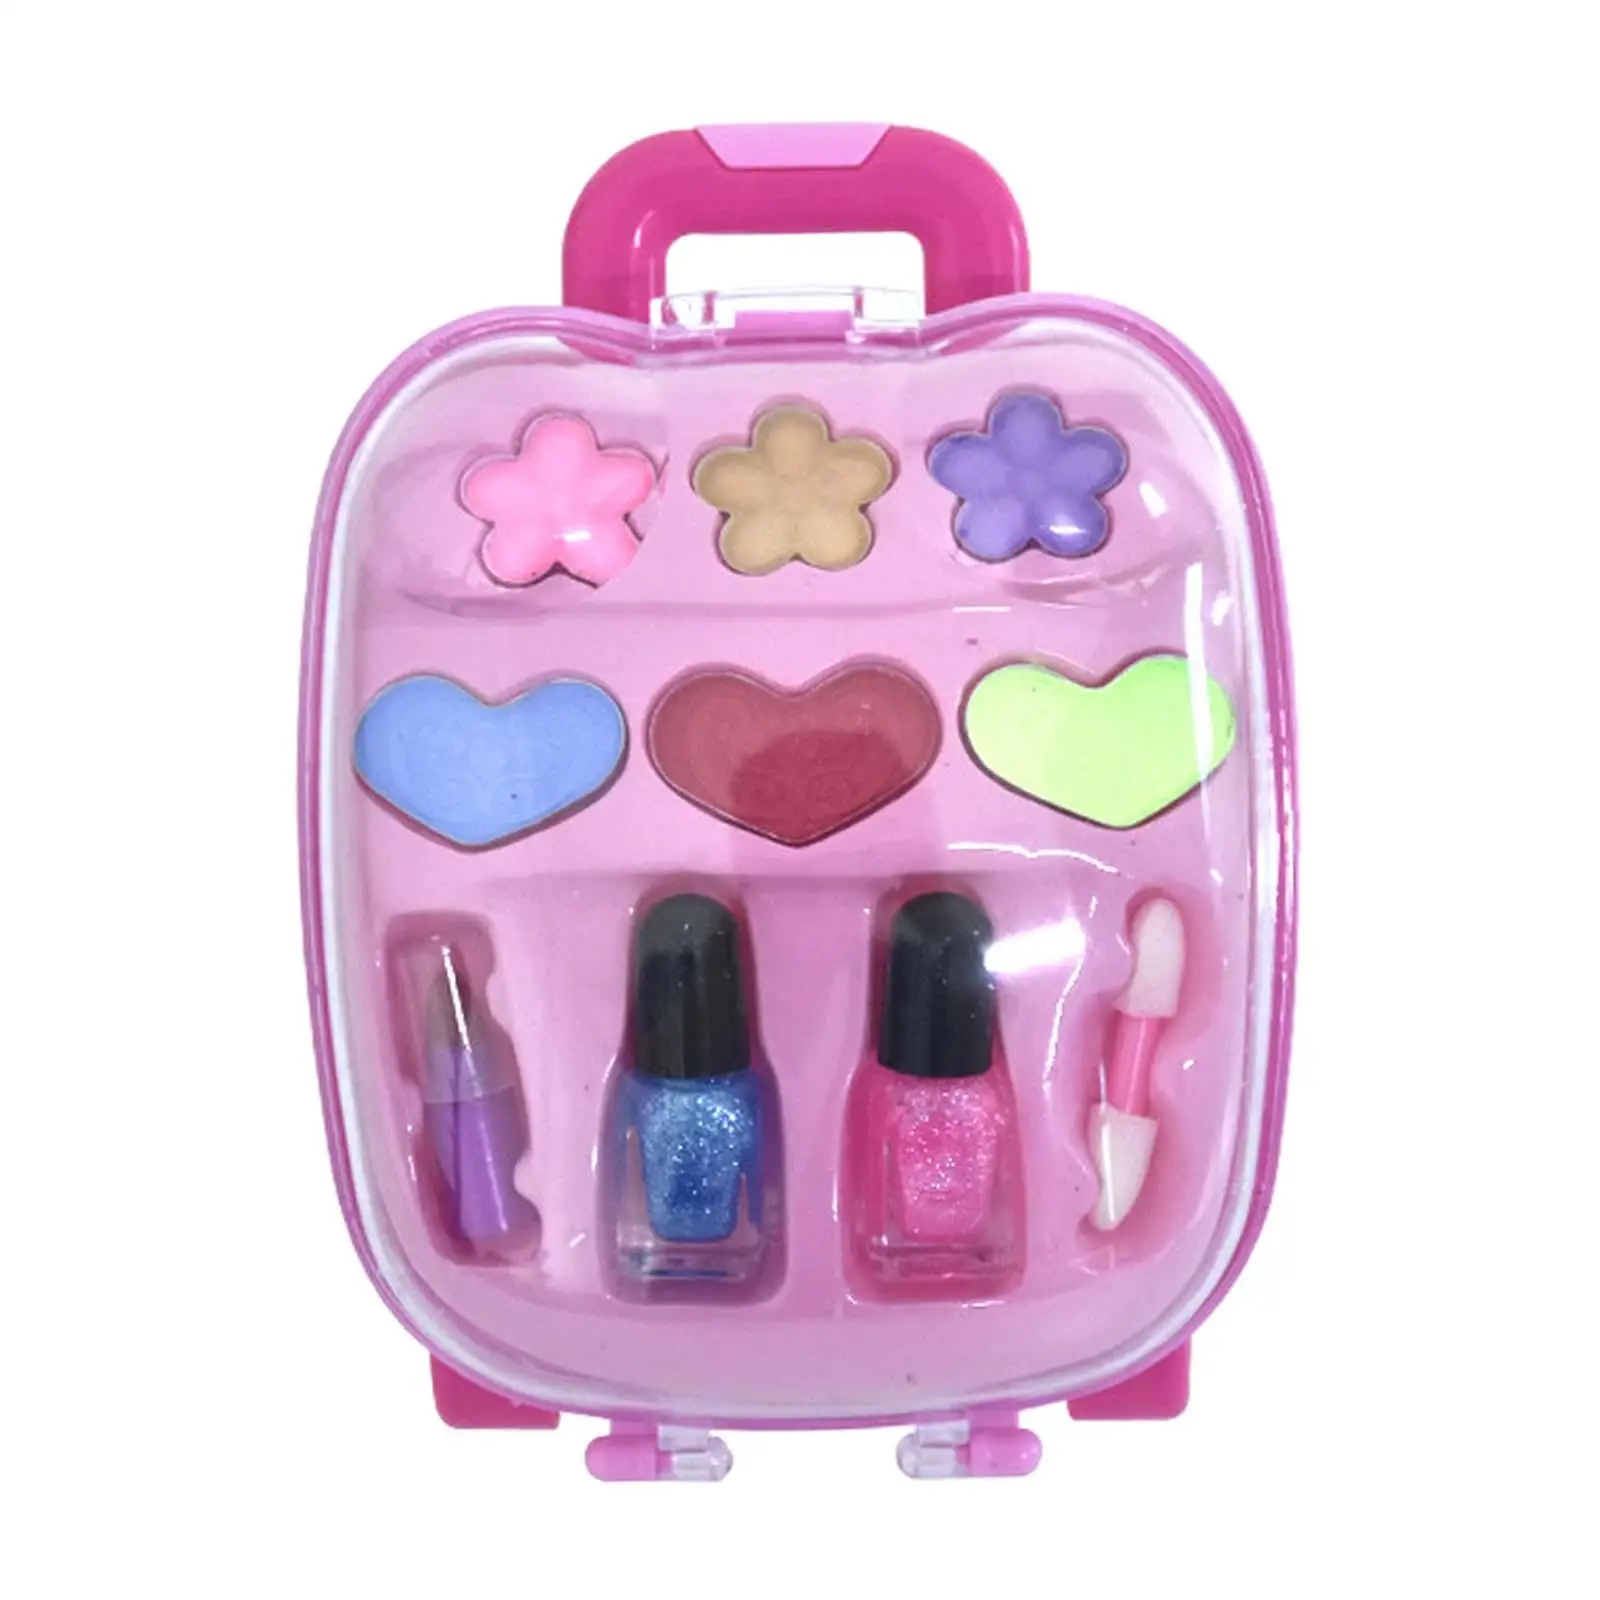 Girls Makeup Toys Princess Dress up Beauty Set Portable Princess Cosmetic Toy for Kids Toddlers Children Age 3 4 5+ Present Gift